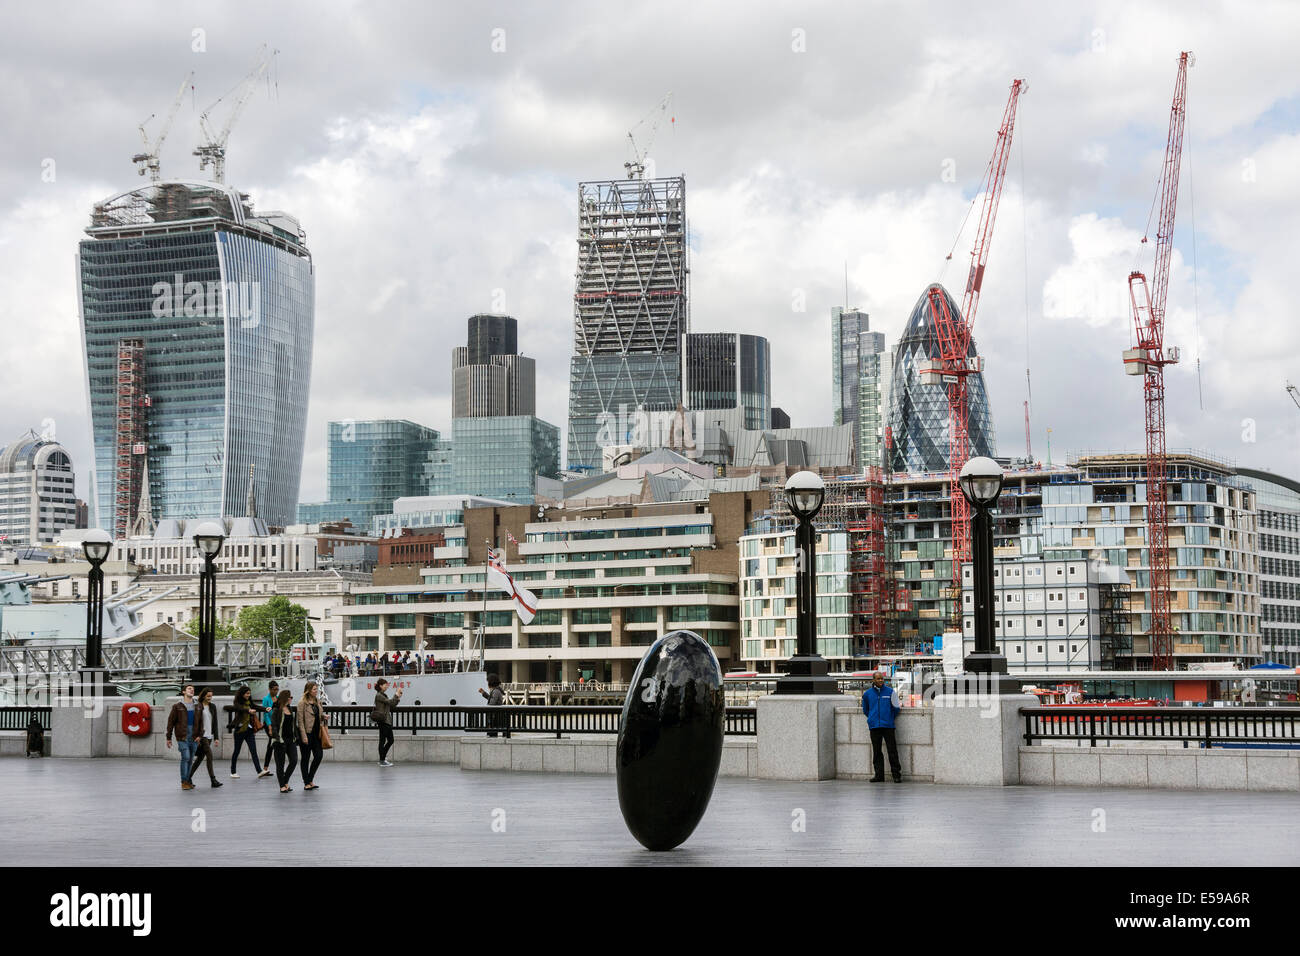 England, London, City of London, view skyscrapers and construction sites at financal district Stock Photo